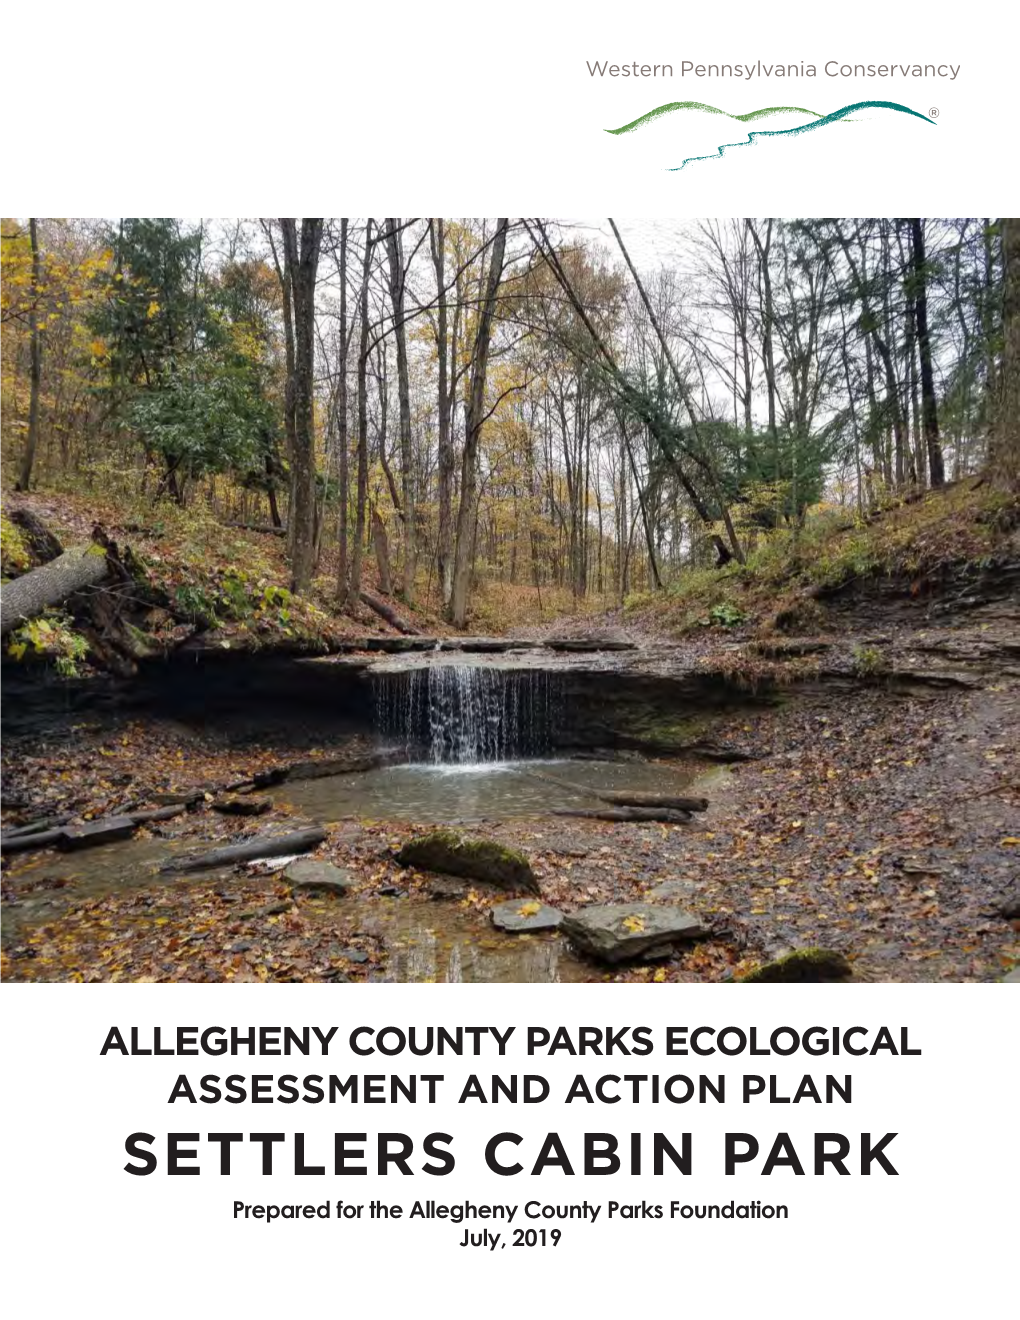 SETTLERS CABIN PARK Prepared for the Allegheny County Parks Foundation July, 2019